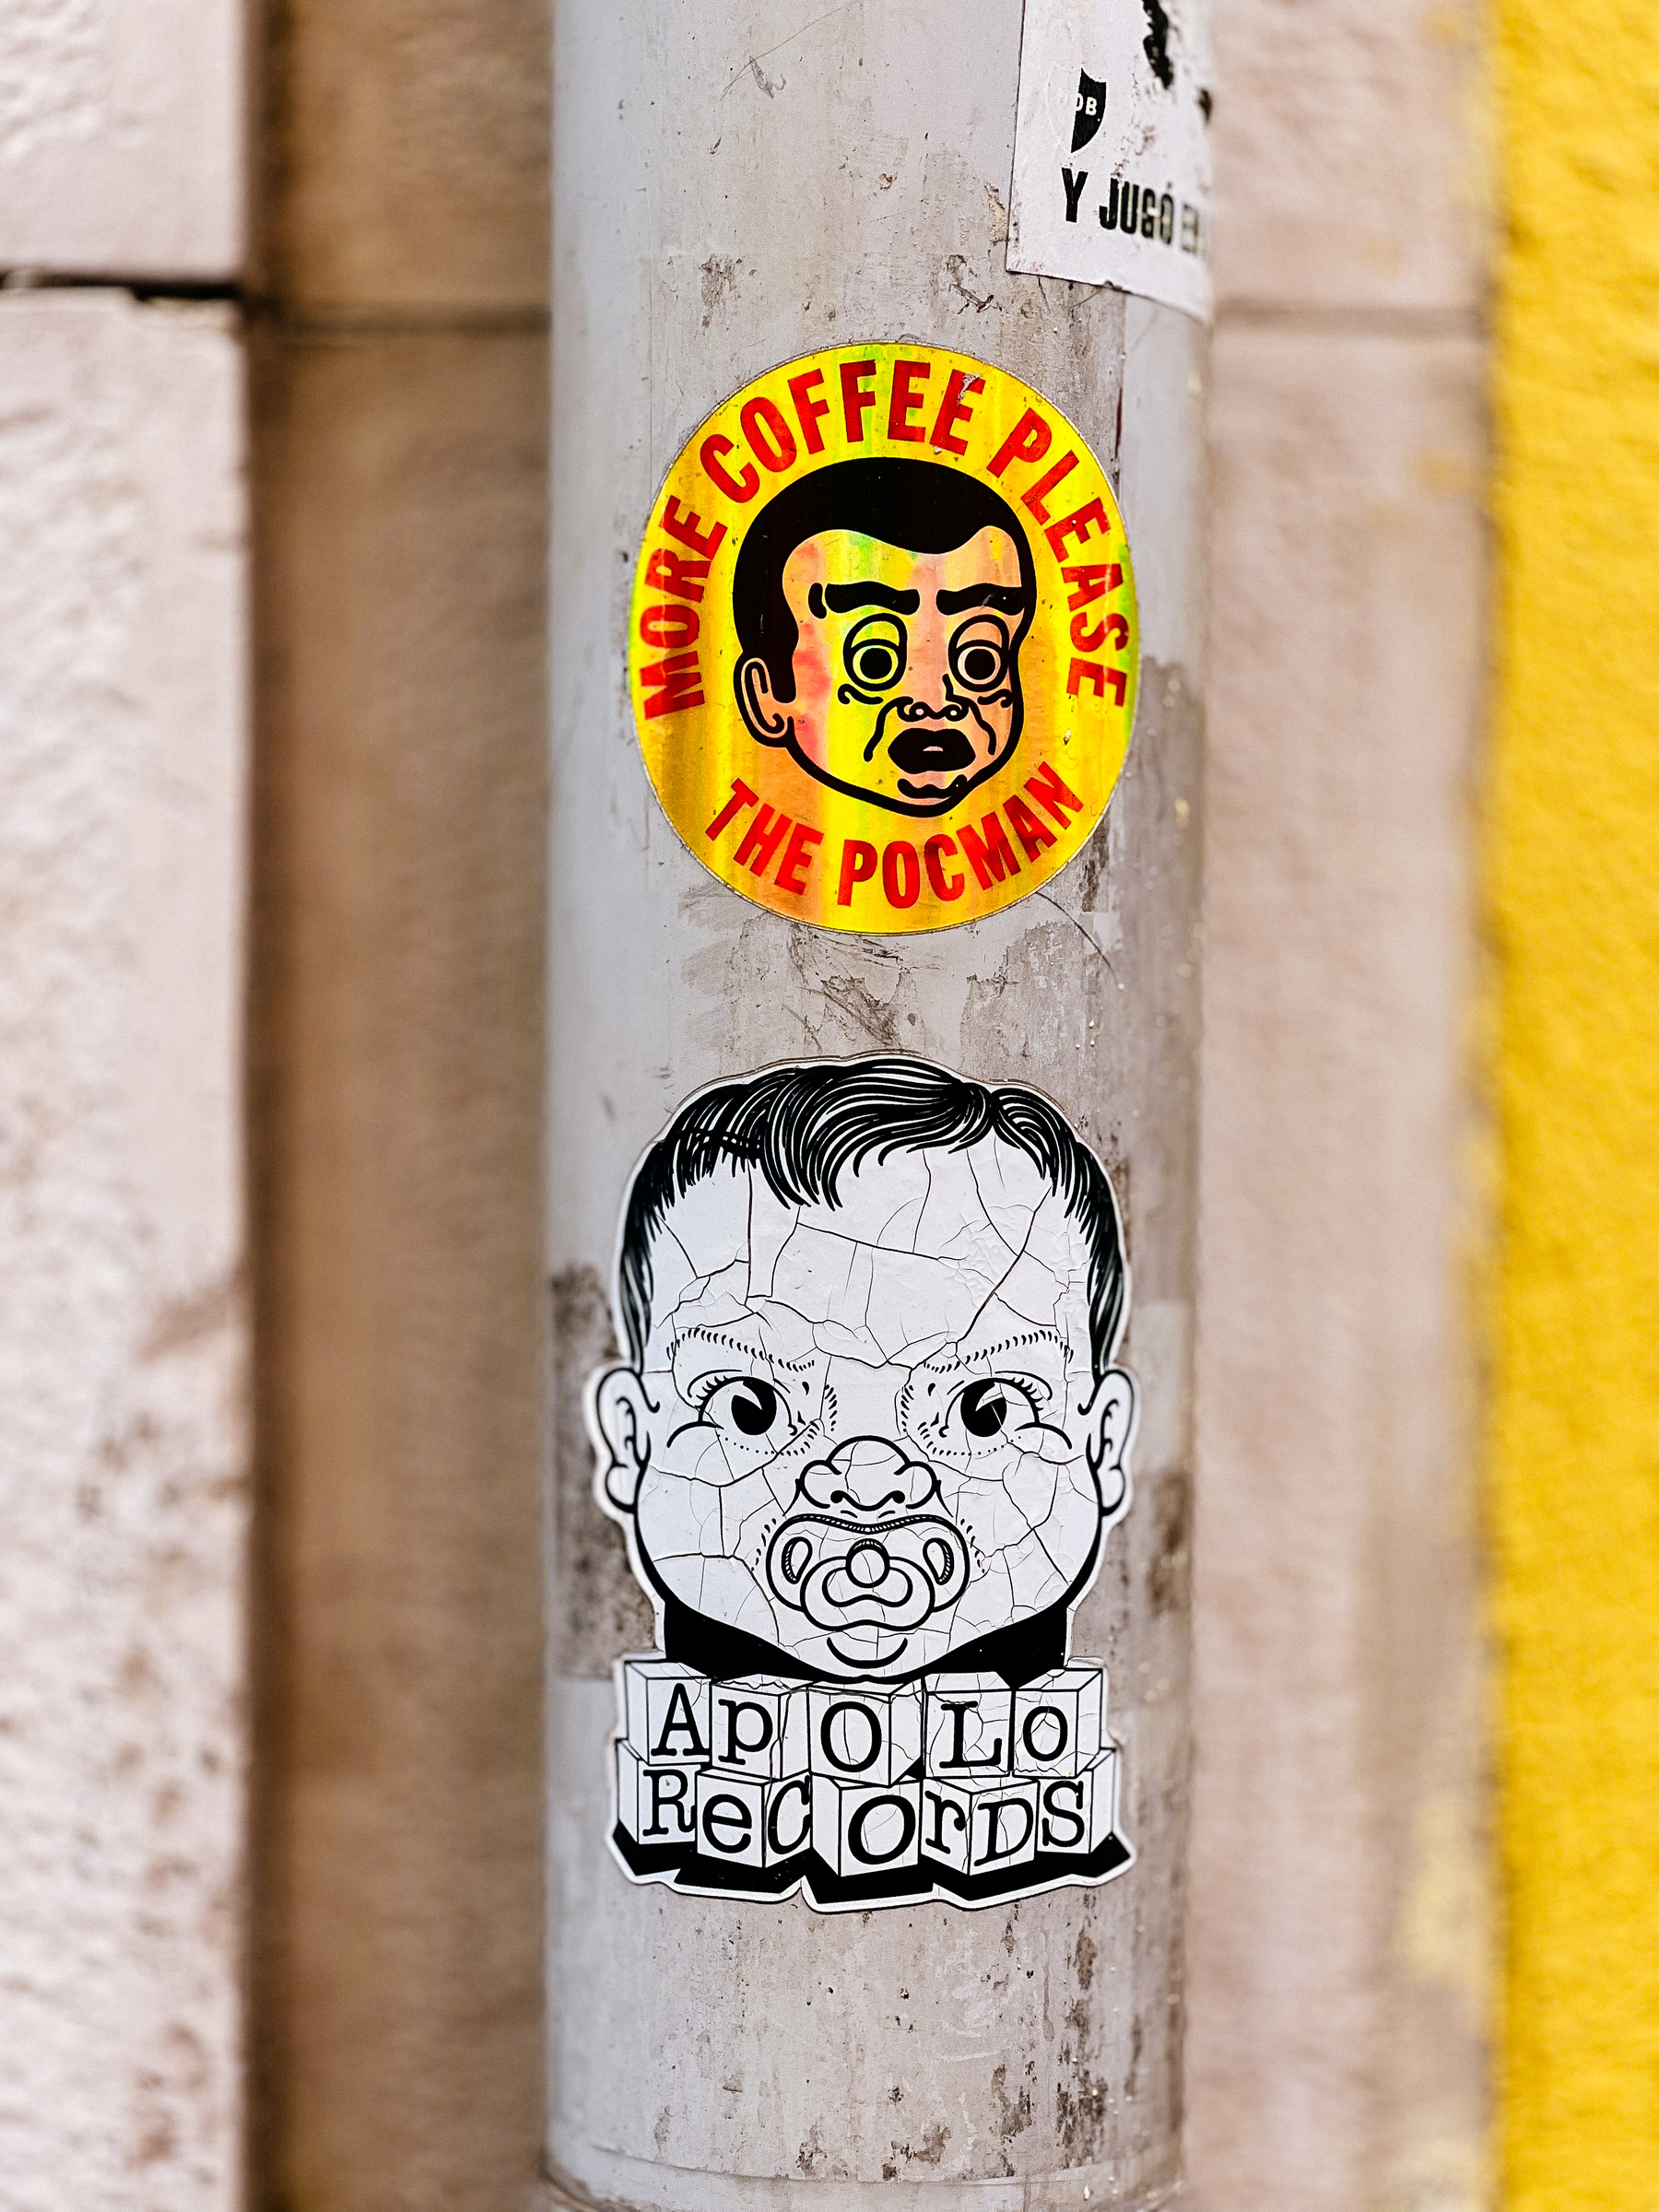 Two stickers, with two baby-faced characters. Text reads &ldquo;More Coffee Please/ The Pocman&rdquo; and &ldquo;Apollo Records&rdquo;. 